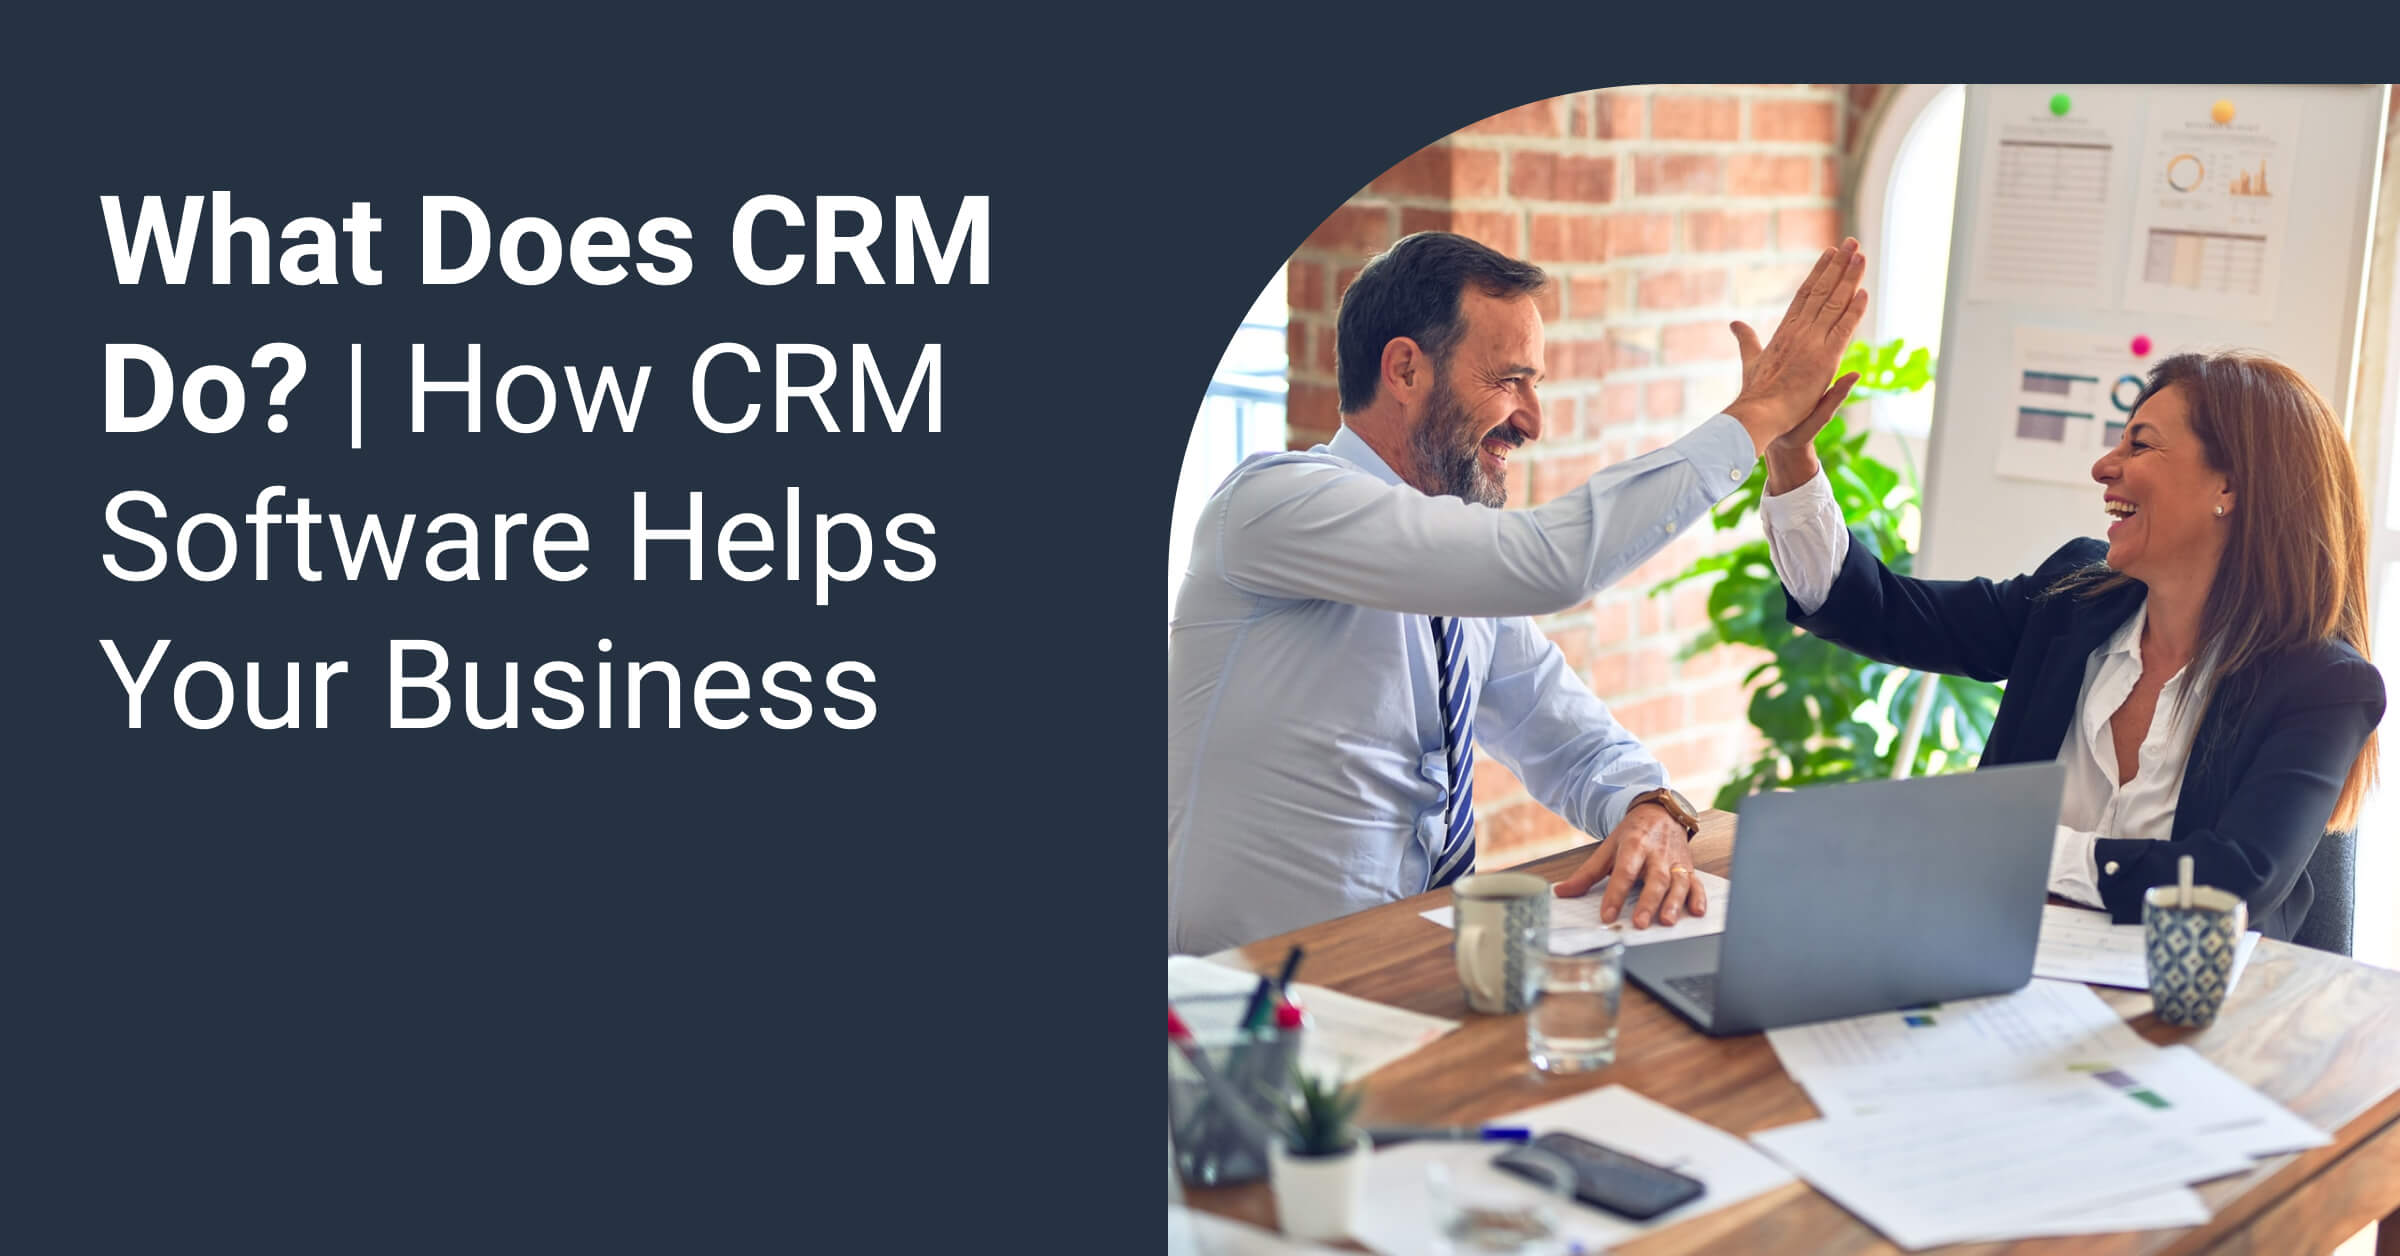 crm stand for